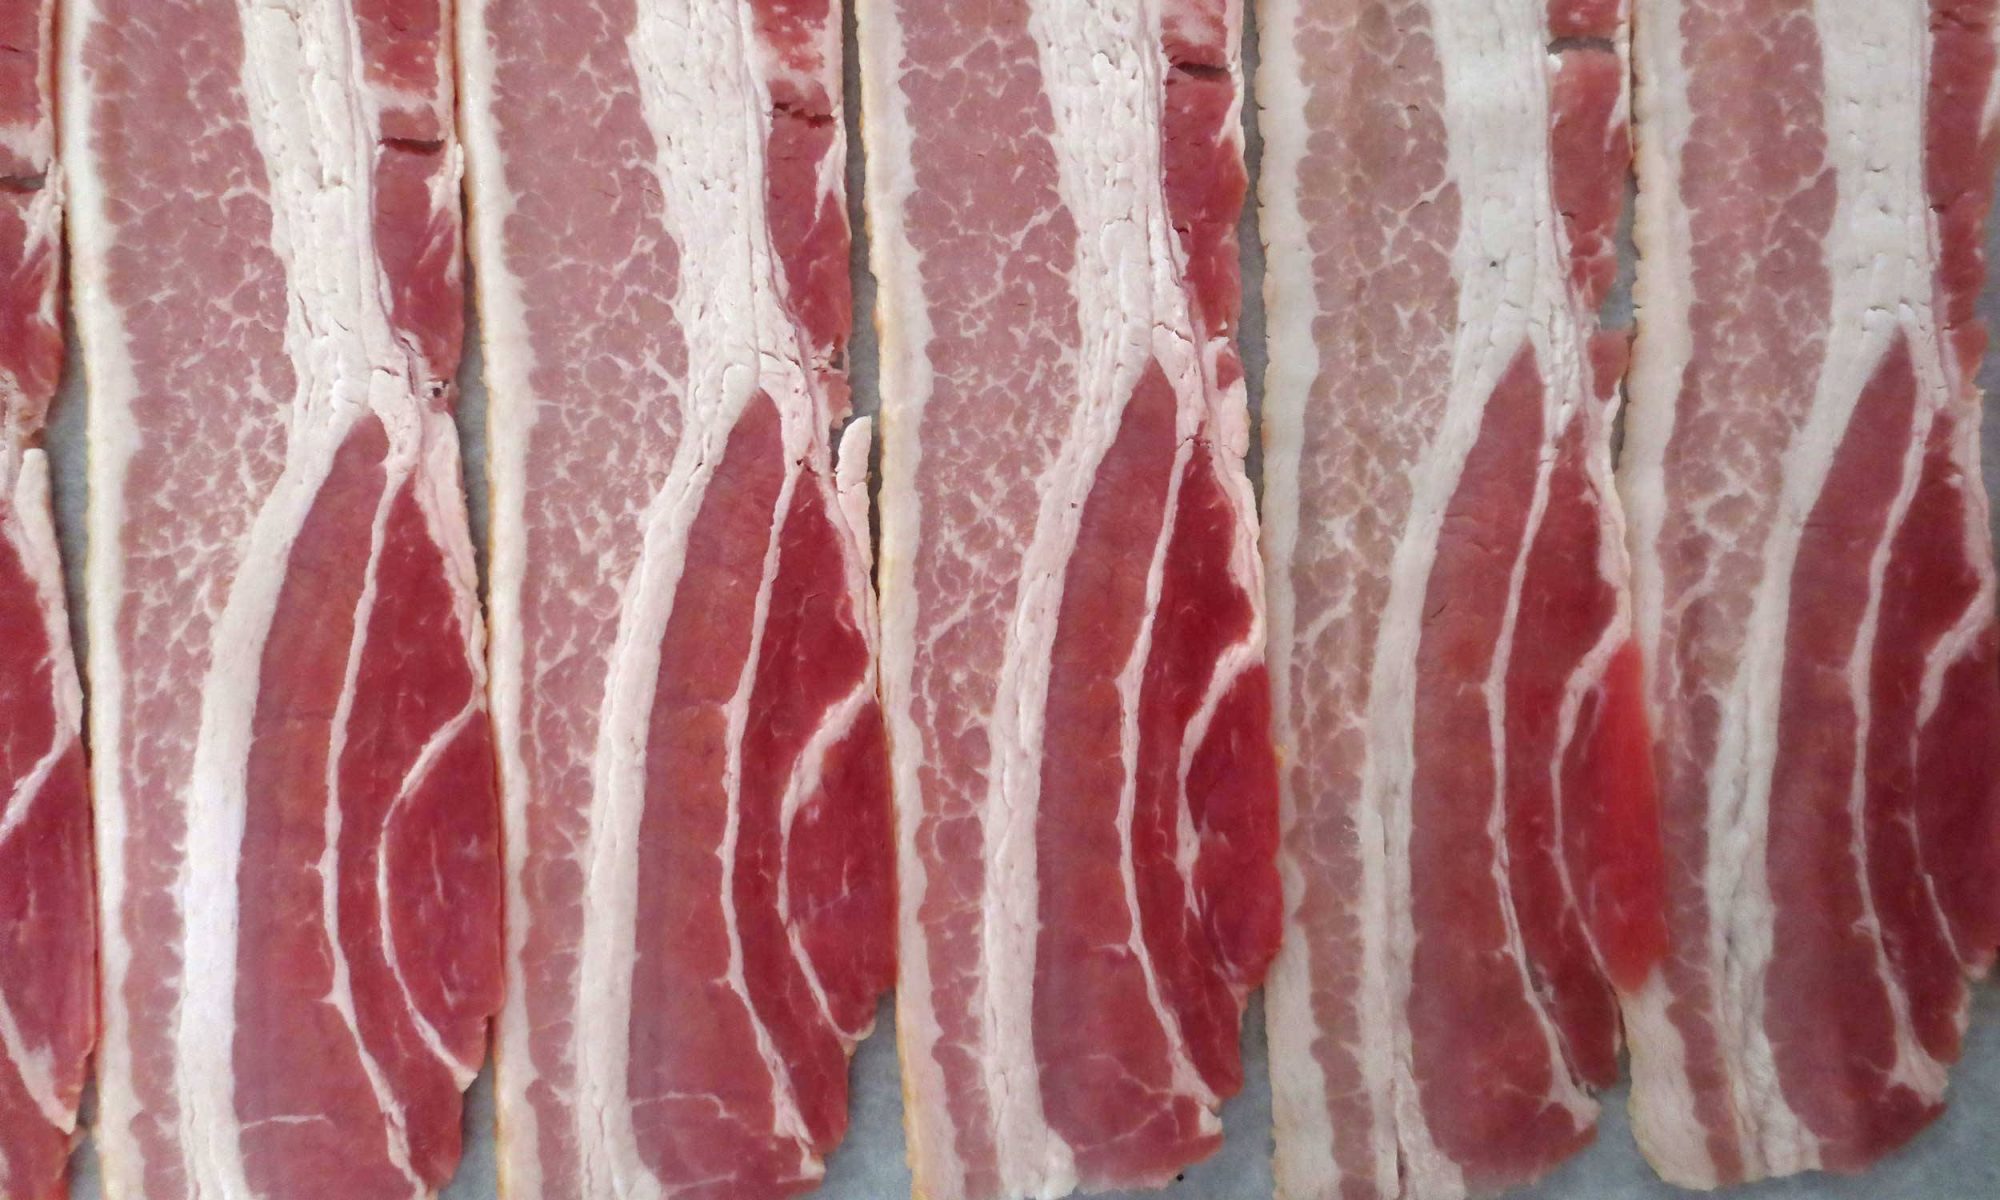 EC: Is Raw Bacon Safe to Eat?